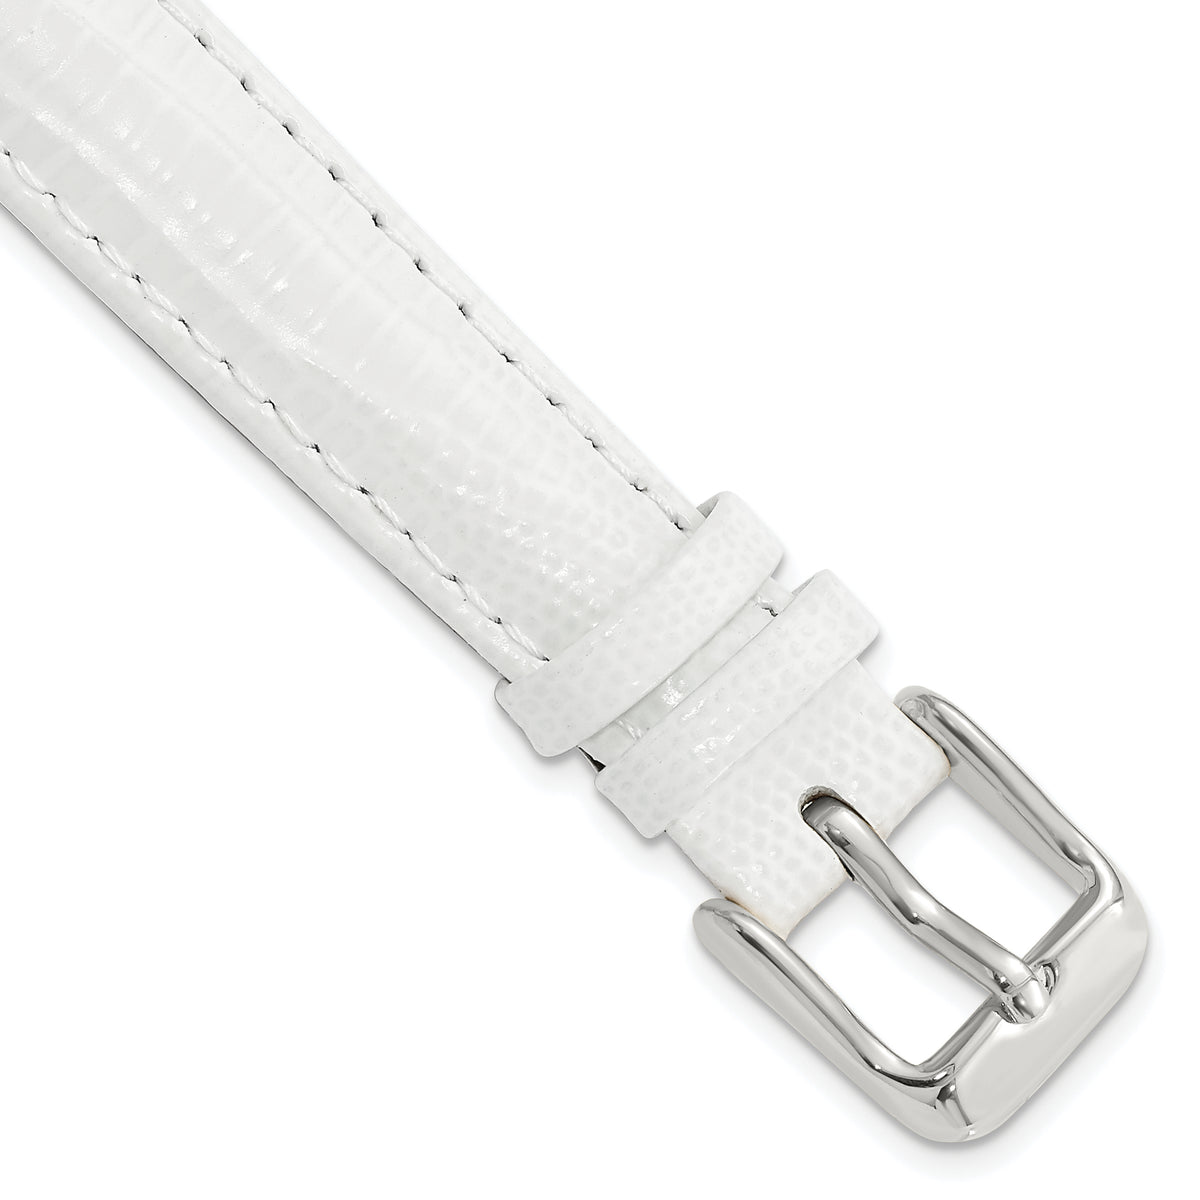 DeBeer 14mm White Teju Liz Grain Leather with Silver-tone Buckle 6.75 inch Watch Band